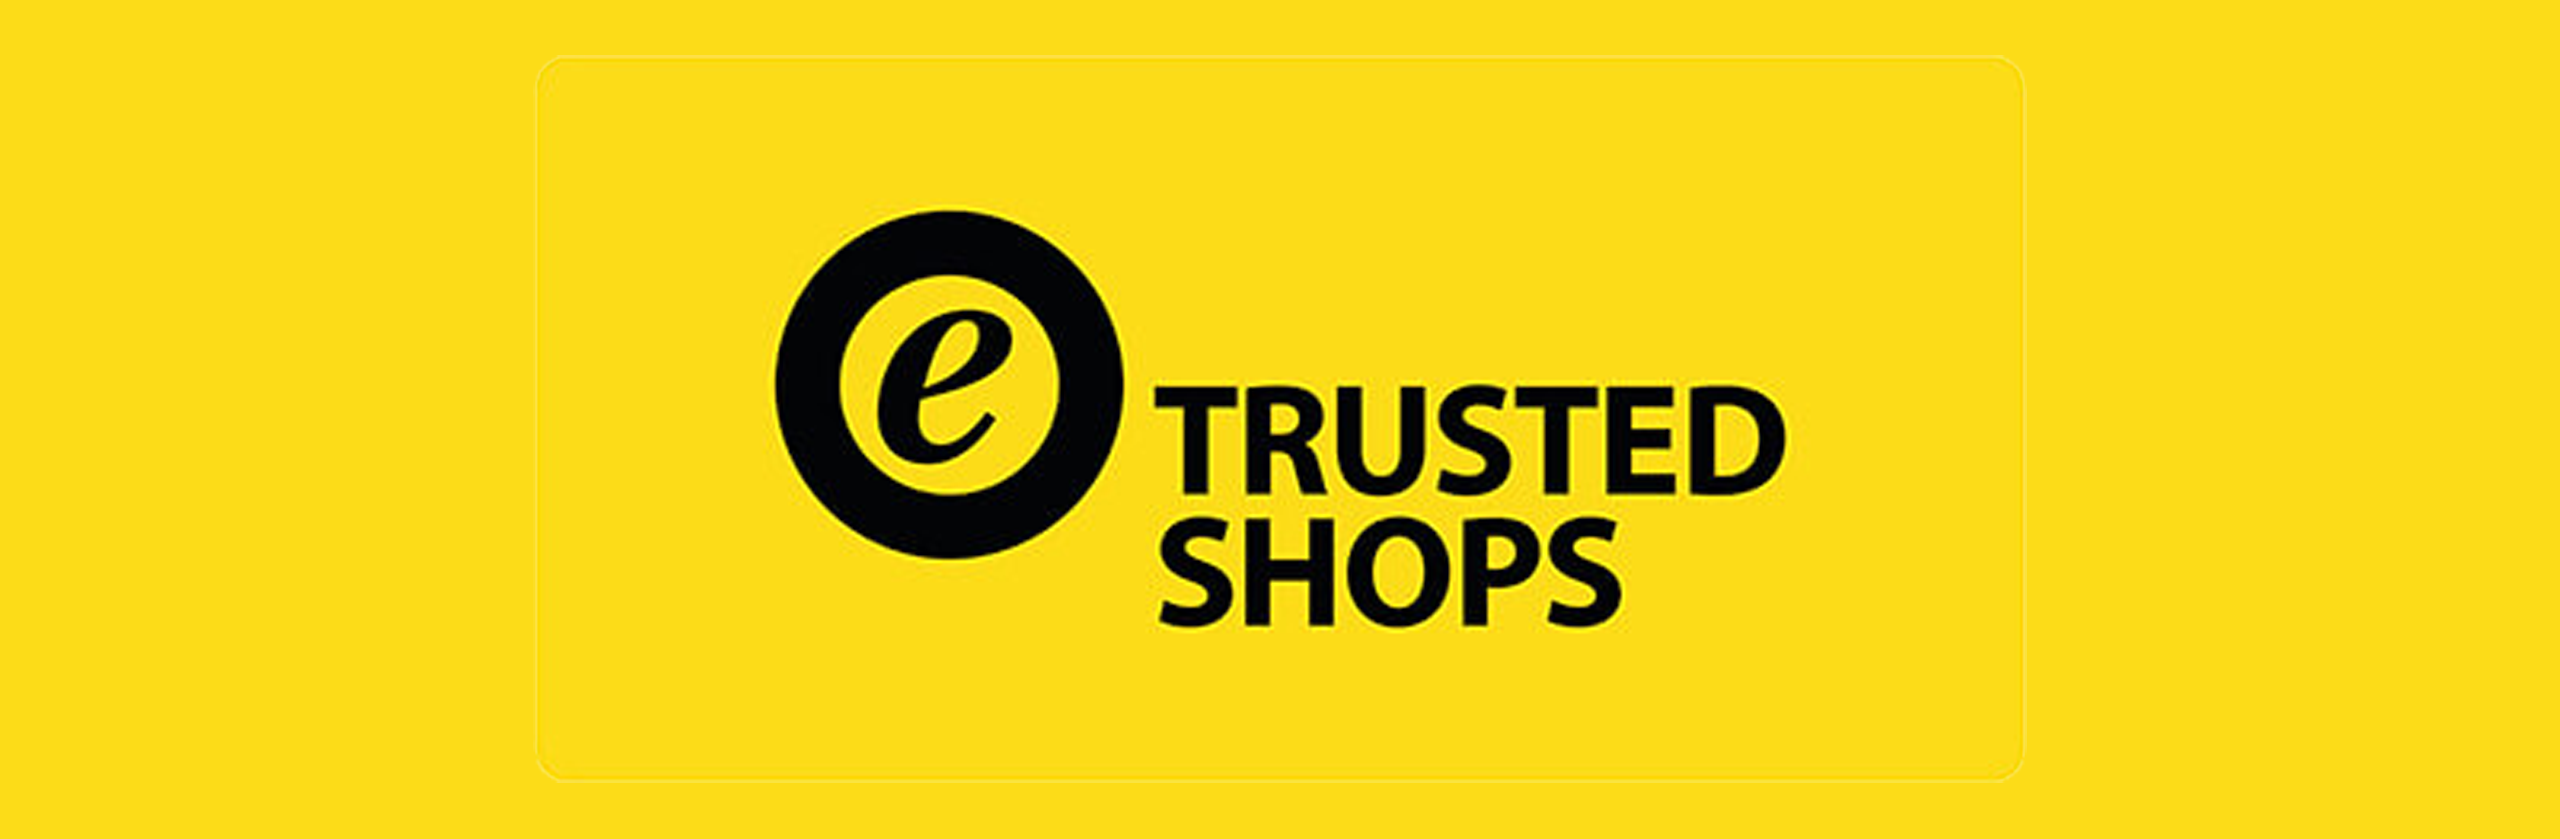  Trusted shops